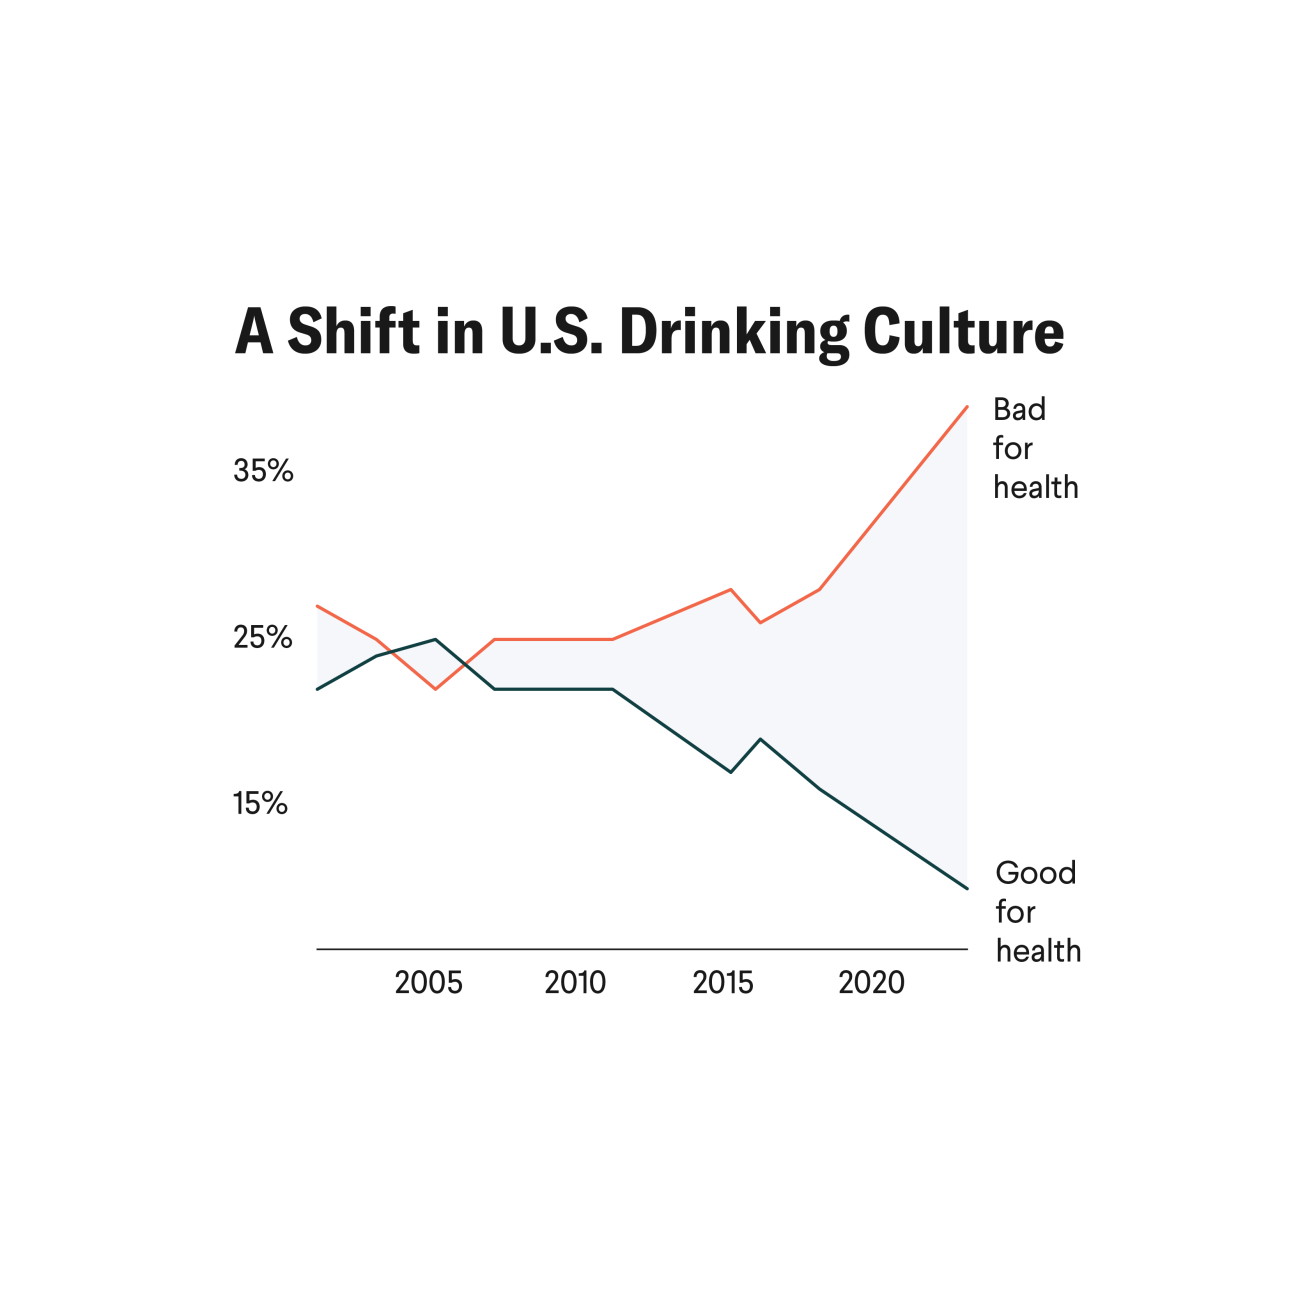 A Shift in U.S. Drinking Culture: A greater share of Americans now believe alcohol is harmful to health rather than beneficial